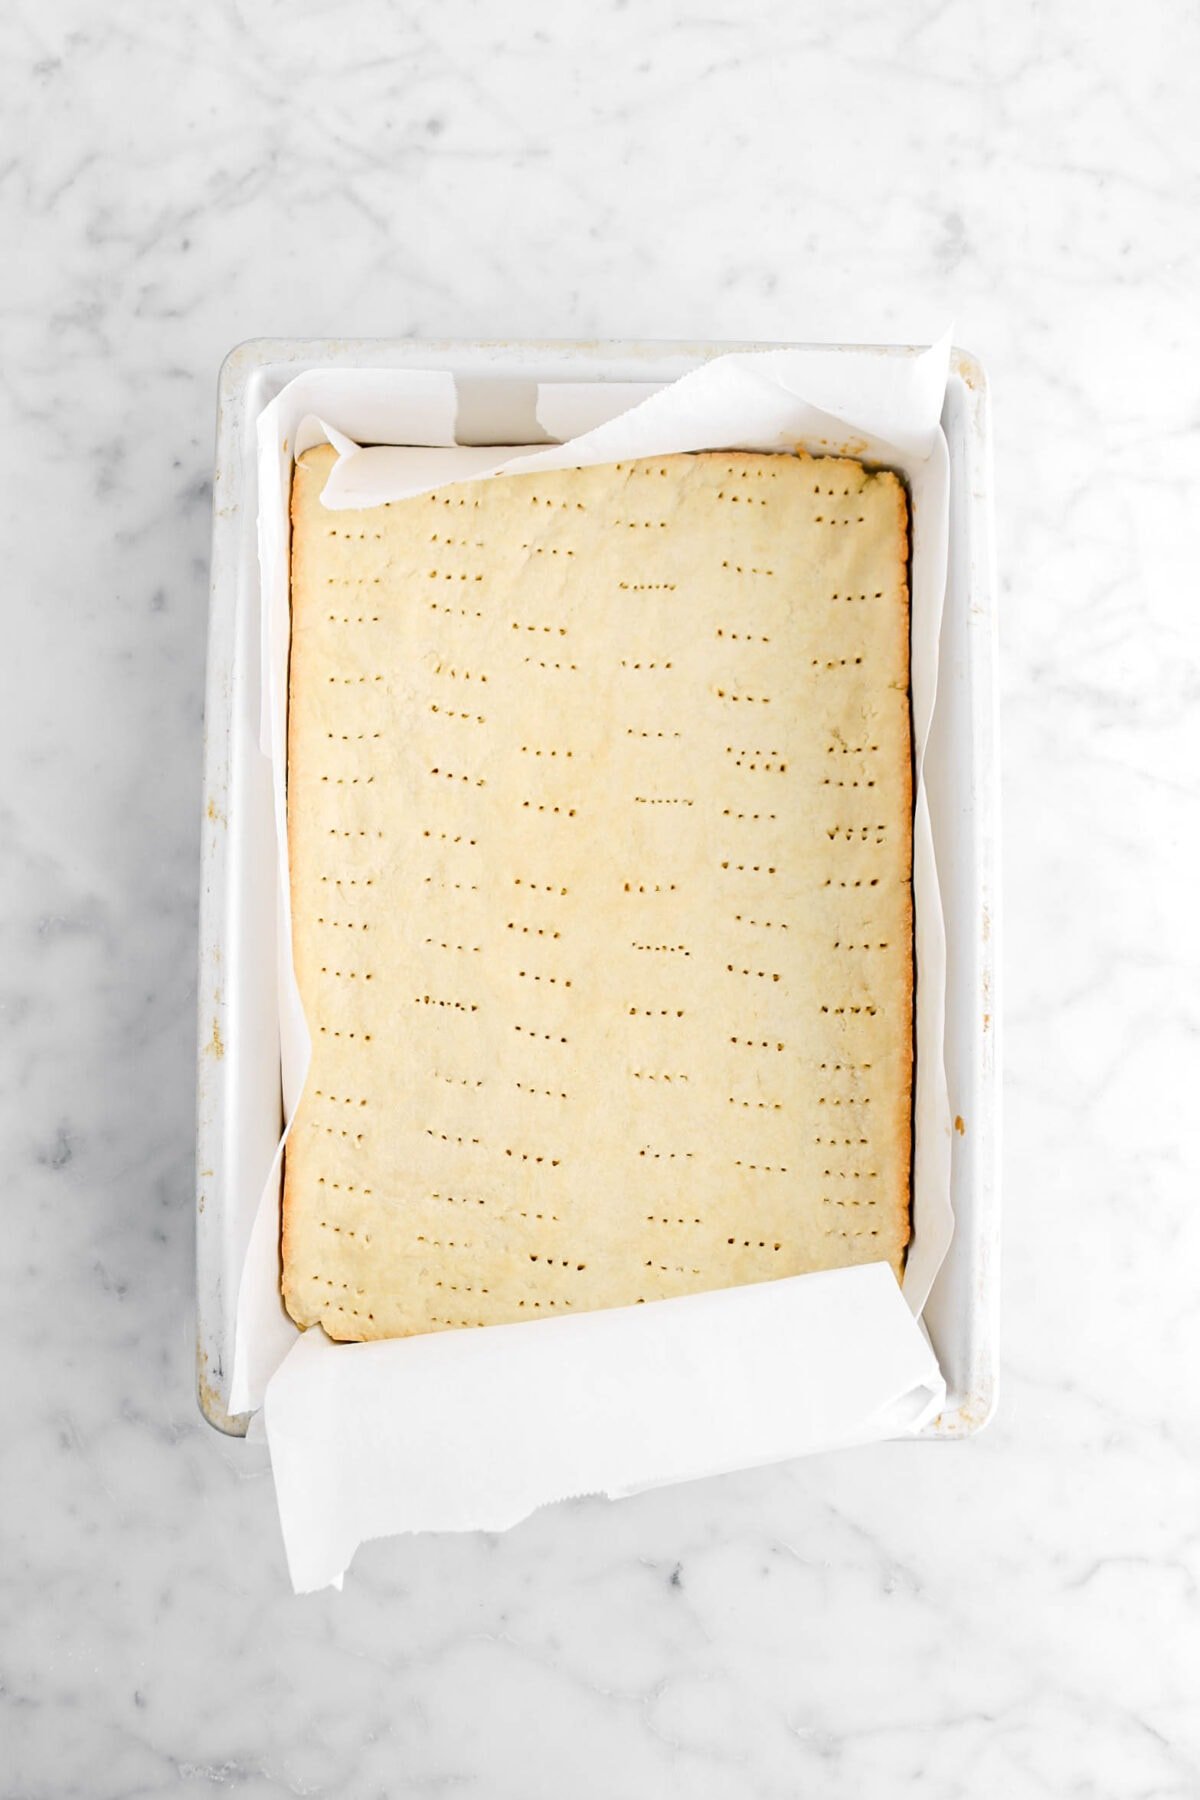 baked shortbread in lined cake pan.